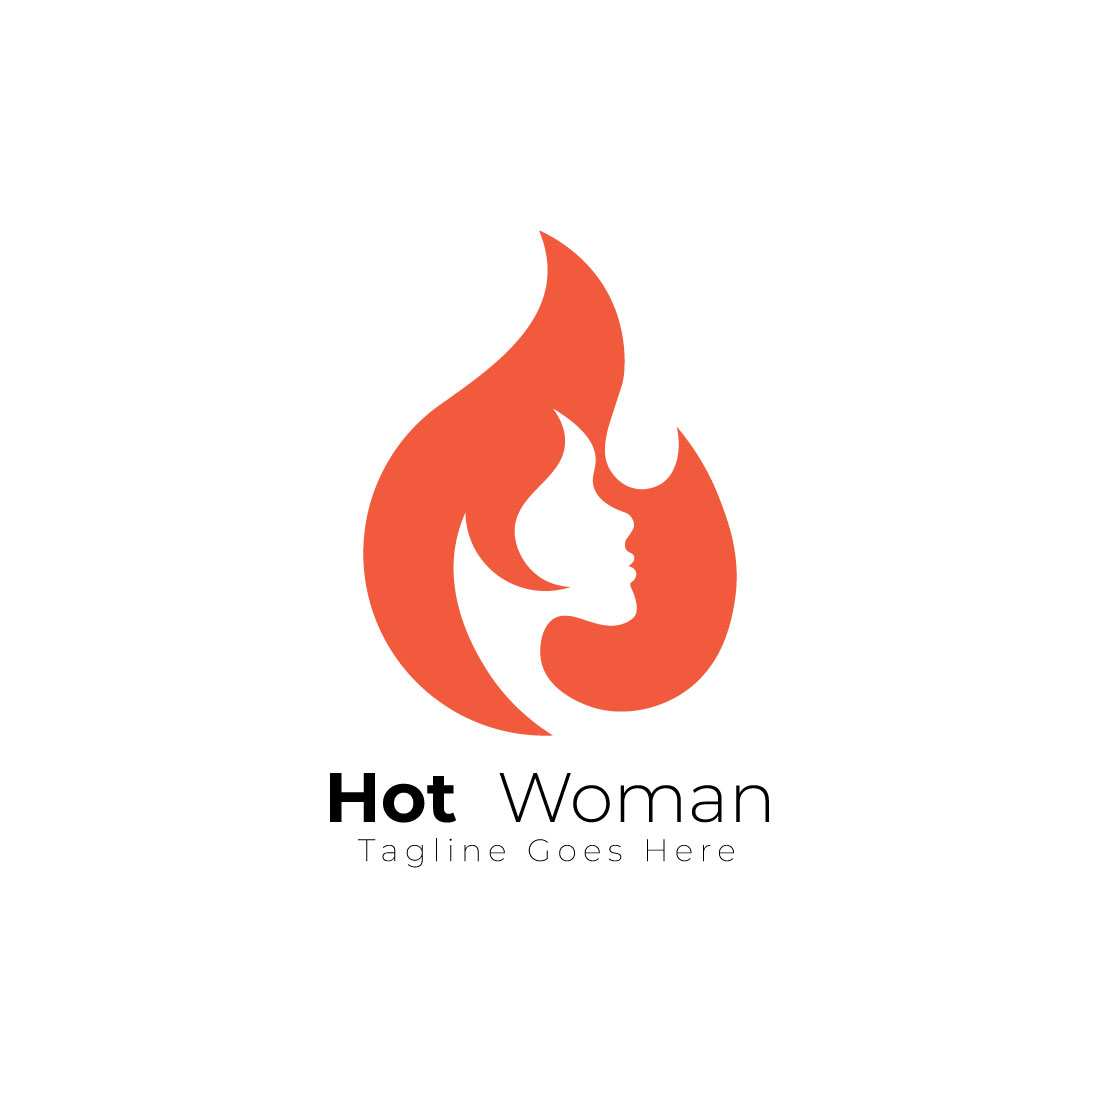 Beauty Fire lady logo icon illustration cover image.